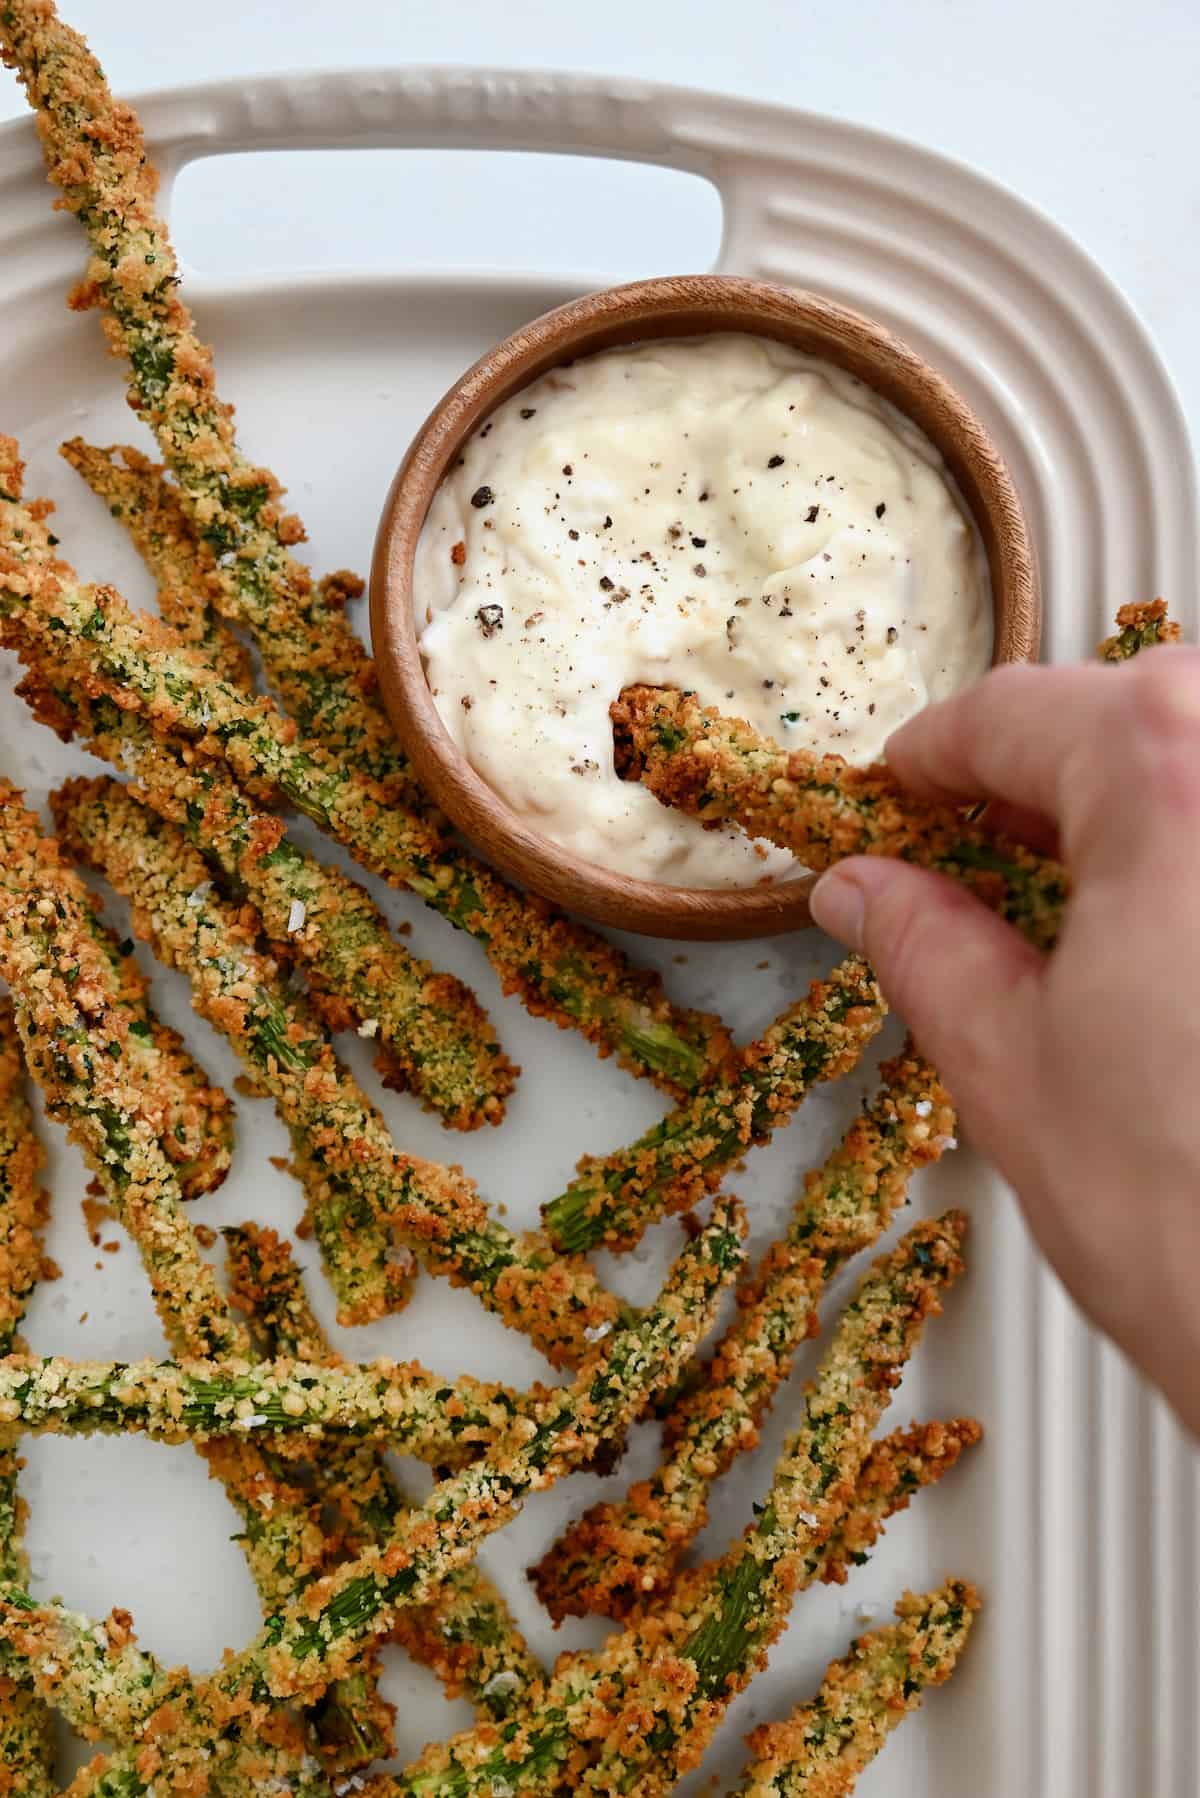 Baked asparagus fries are piled in an oblong white platter, along with a bowl of roasted garlic aioli. A hand is dipping an asparagus fry into the aioli.